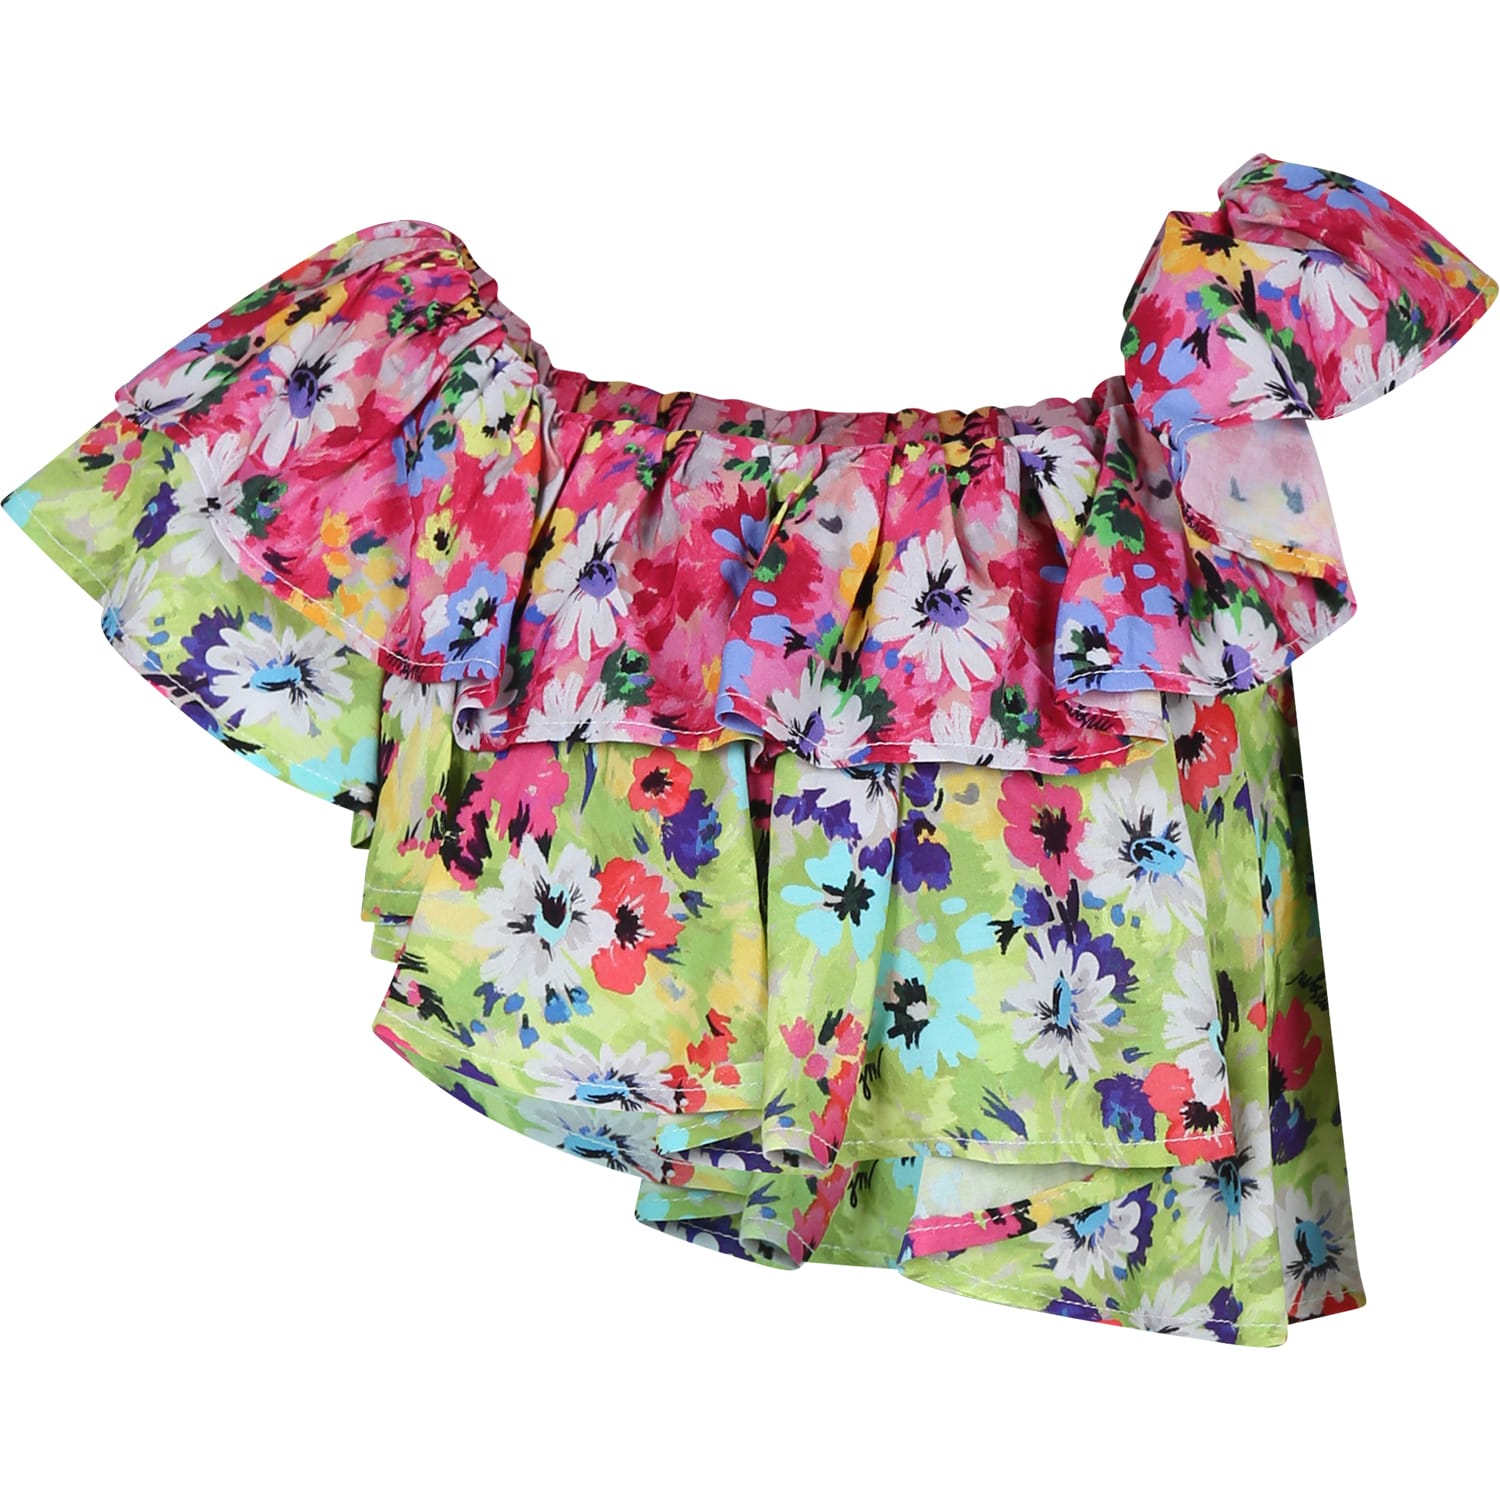 Msgm Kids' Fuchsia Crop Top For Girl With Floral Print In Multi